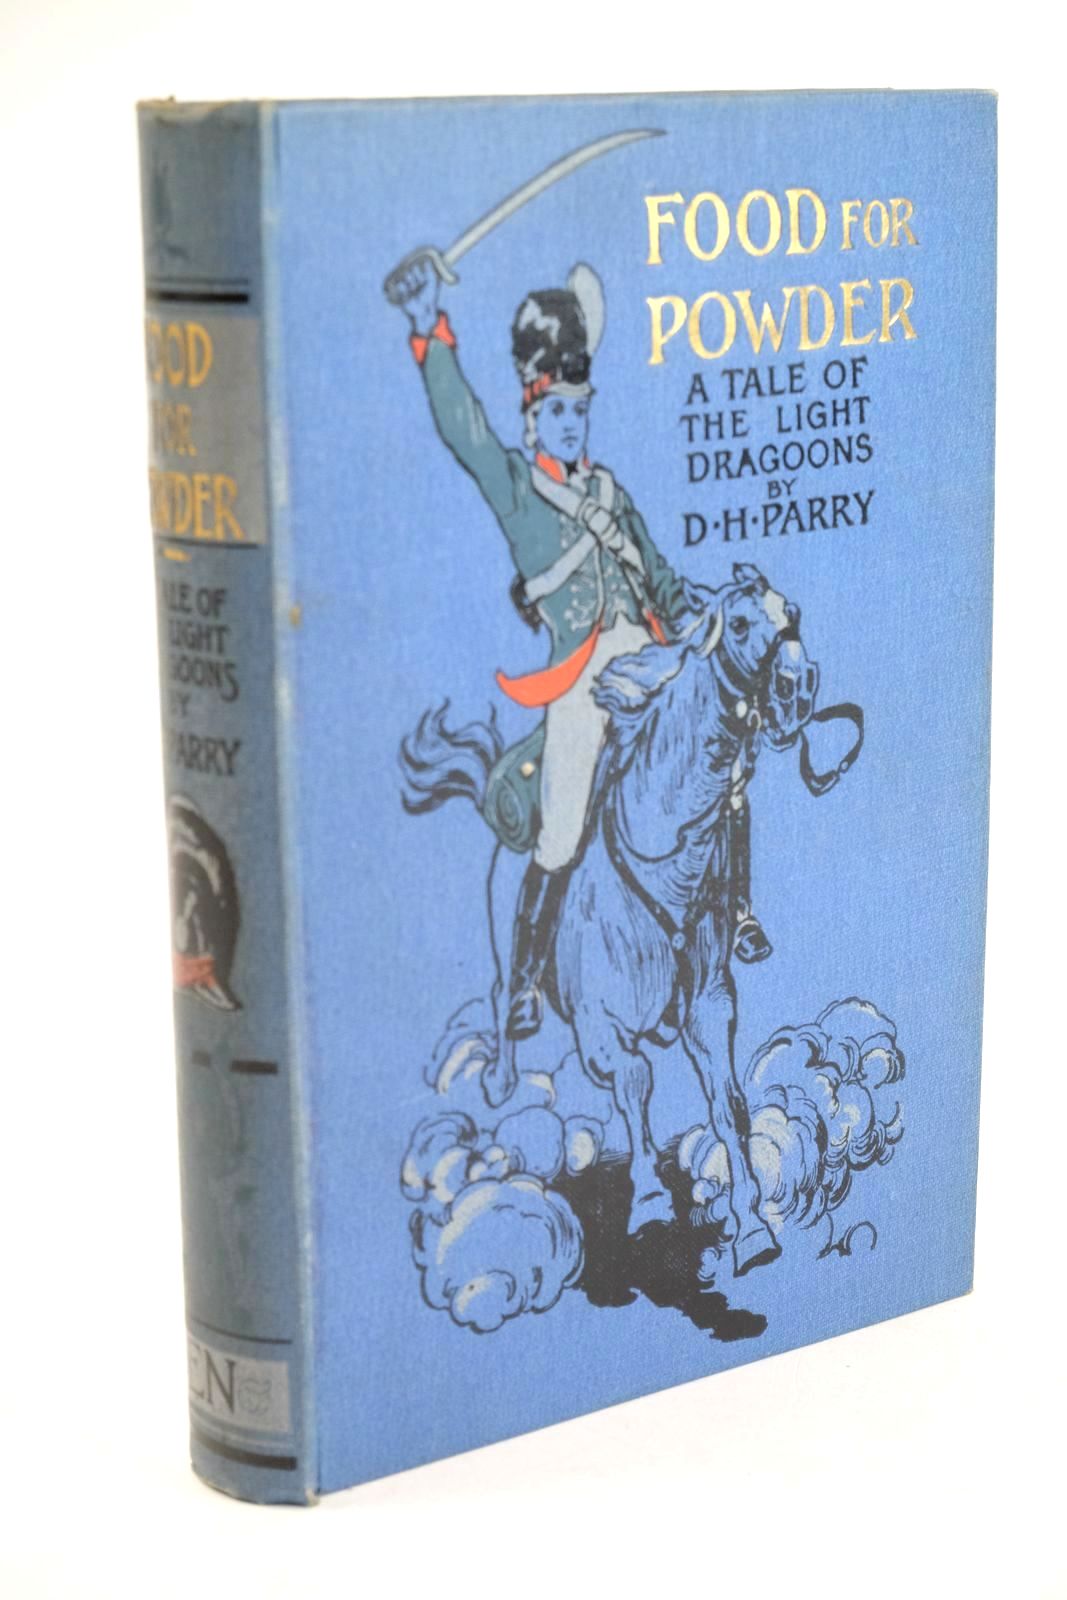 Photo of FOOD FOR POWDER written by Parry, D.H. illustrated by Glover, G.C. published by Ernest Nister (STOCK CODE: 1324696)  for sale by Stella & Rose's Books